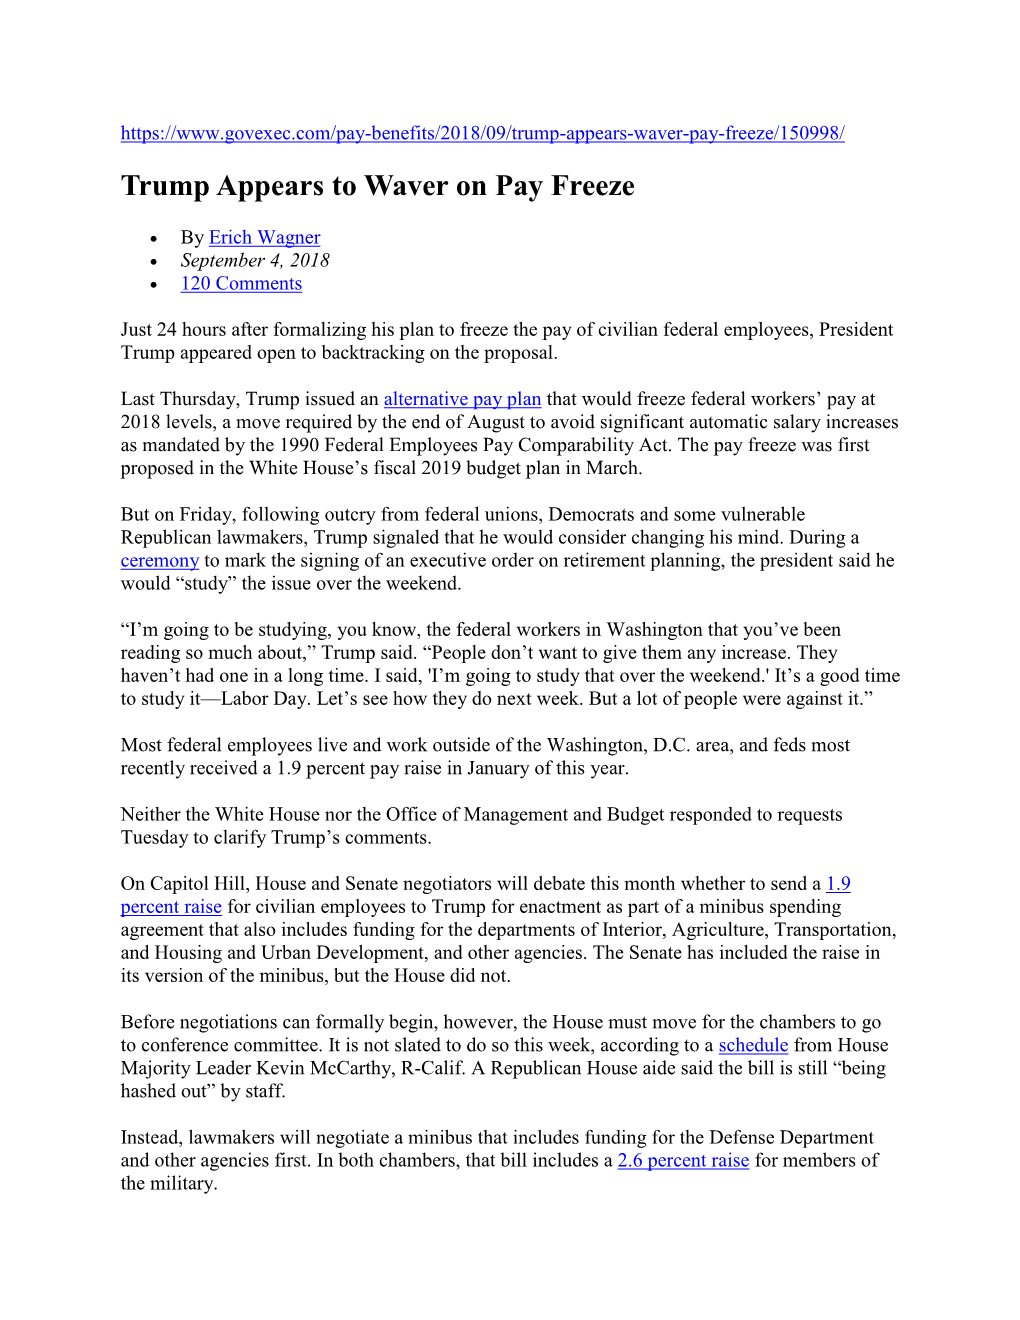 Trump Appears to Waver on Pay Freeze